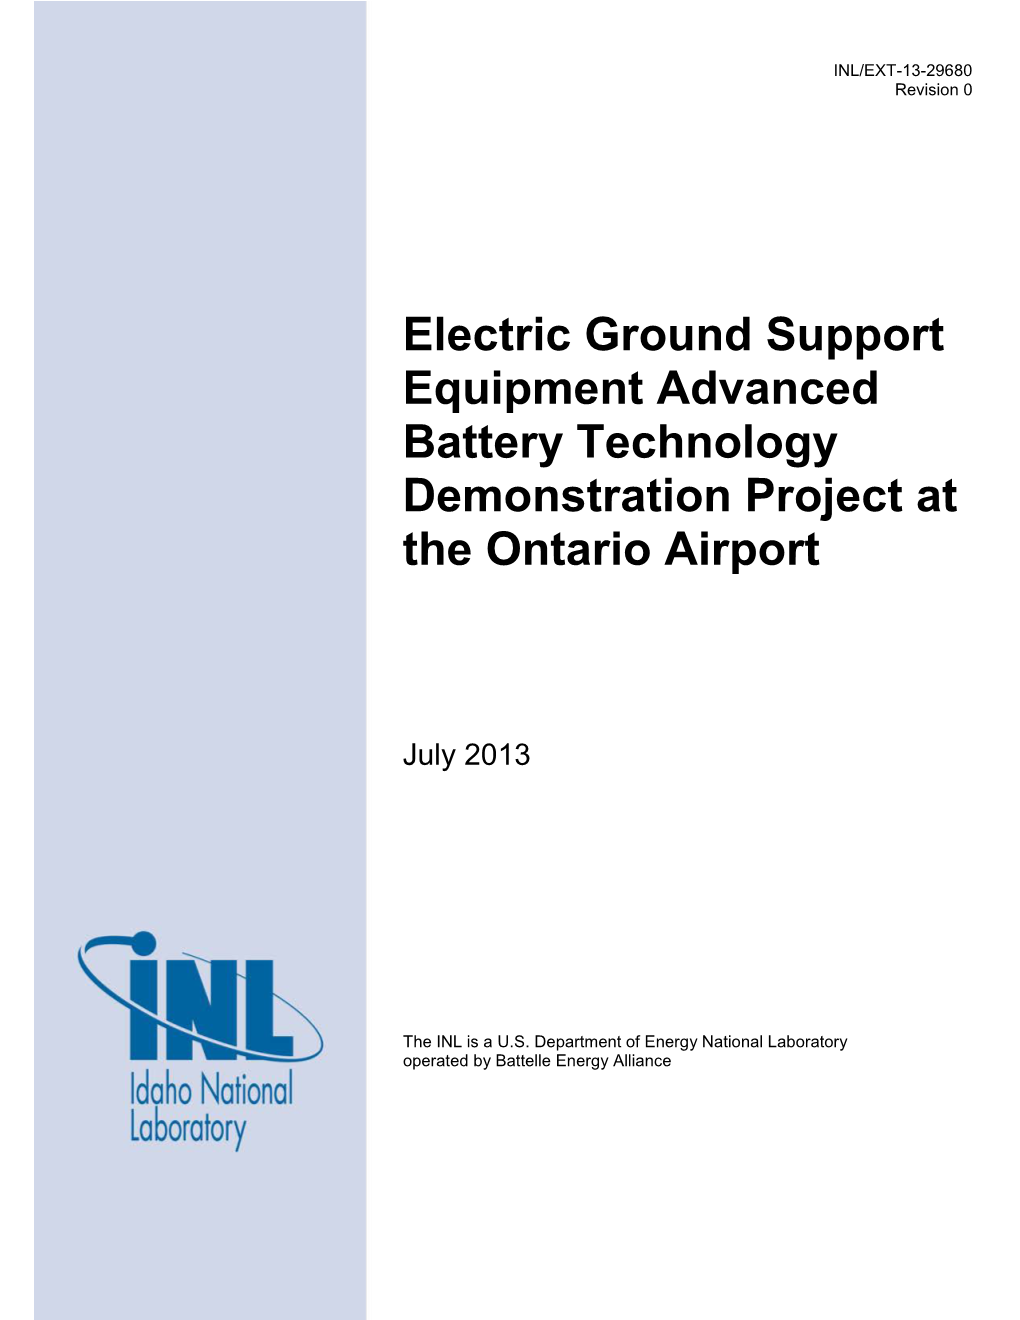 Electric Ground Support Equipment Advanced Battery Technology Demonstration Project at the Ontario Airport